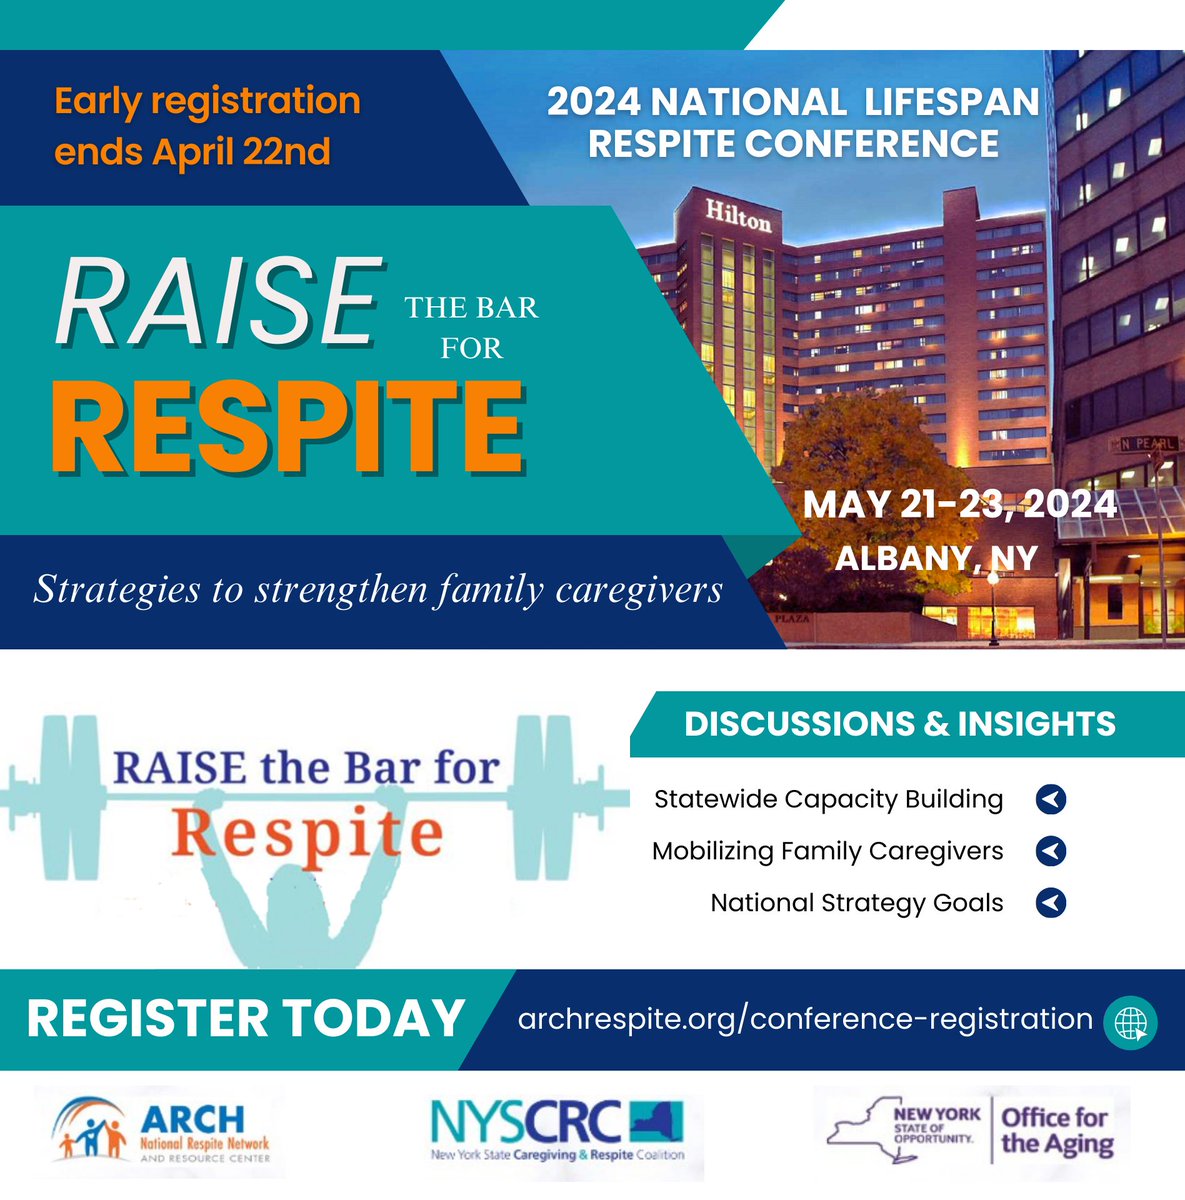 Early registration for the 2024 National Lifespan Respite Conference in Albany, NY, May 21-23, has been extended to April 22nd! Please join us and spread the word to RAISE the Bar for Respite! #RAISErespite #respite #caregivers Register at lnkd.in/eAZS_uDC